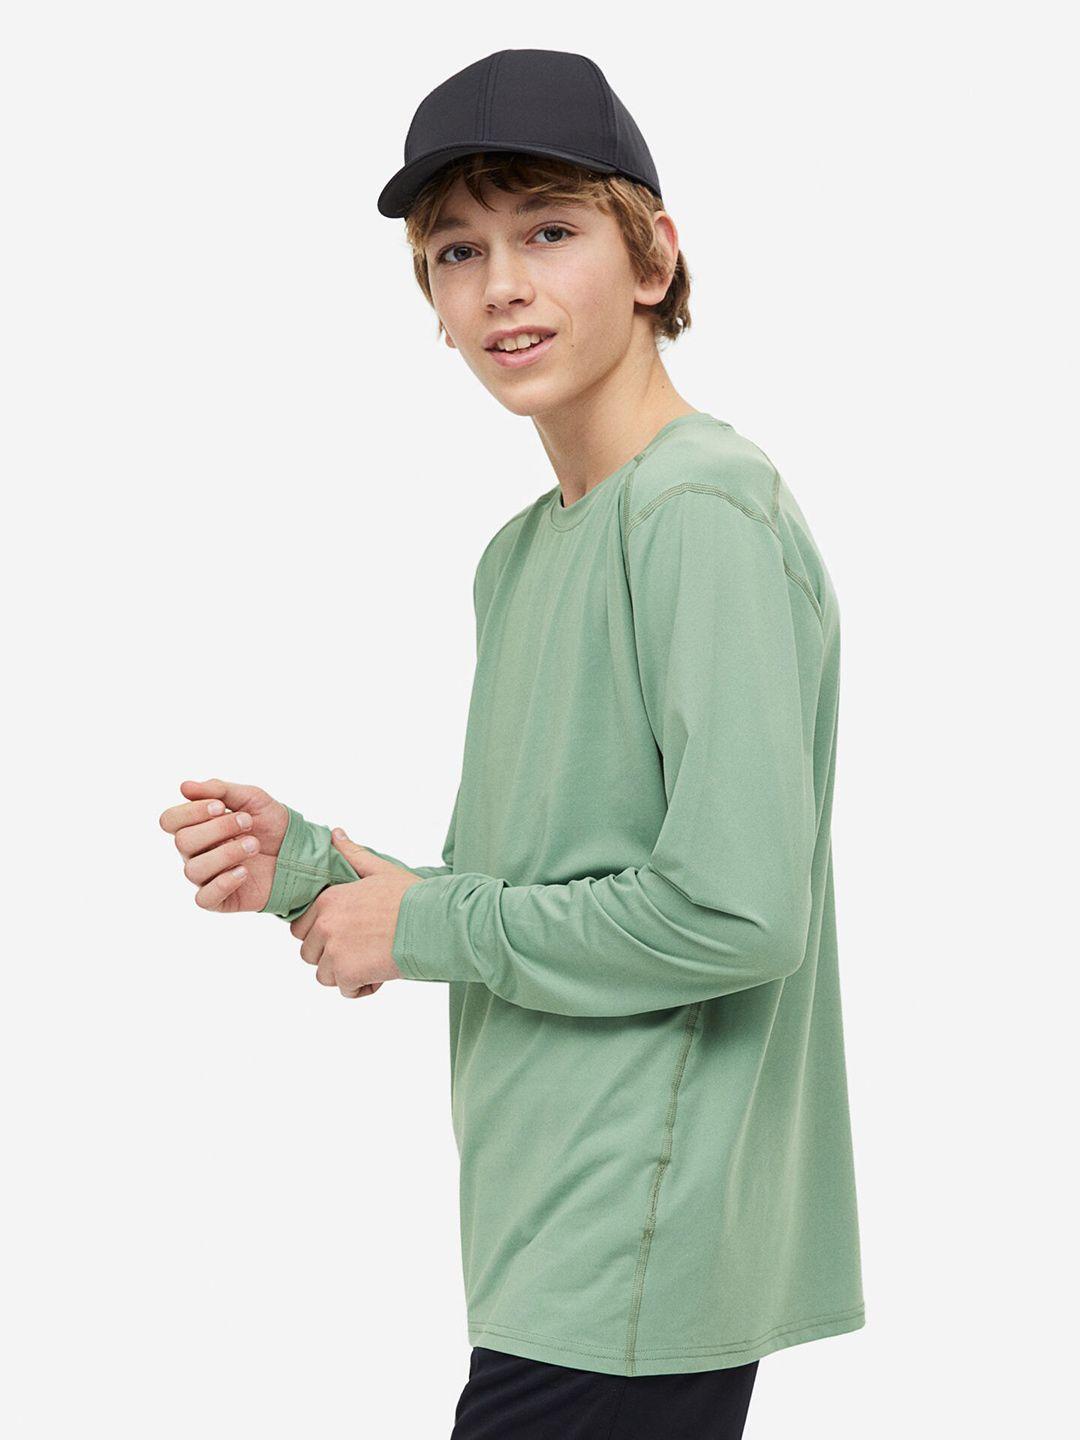 h&m boys 2-pack sports tops